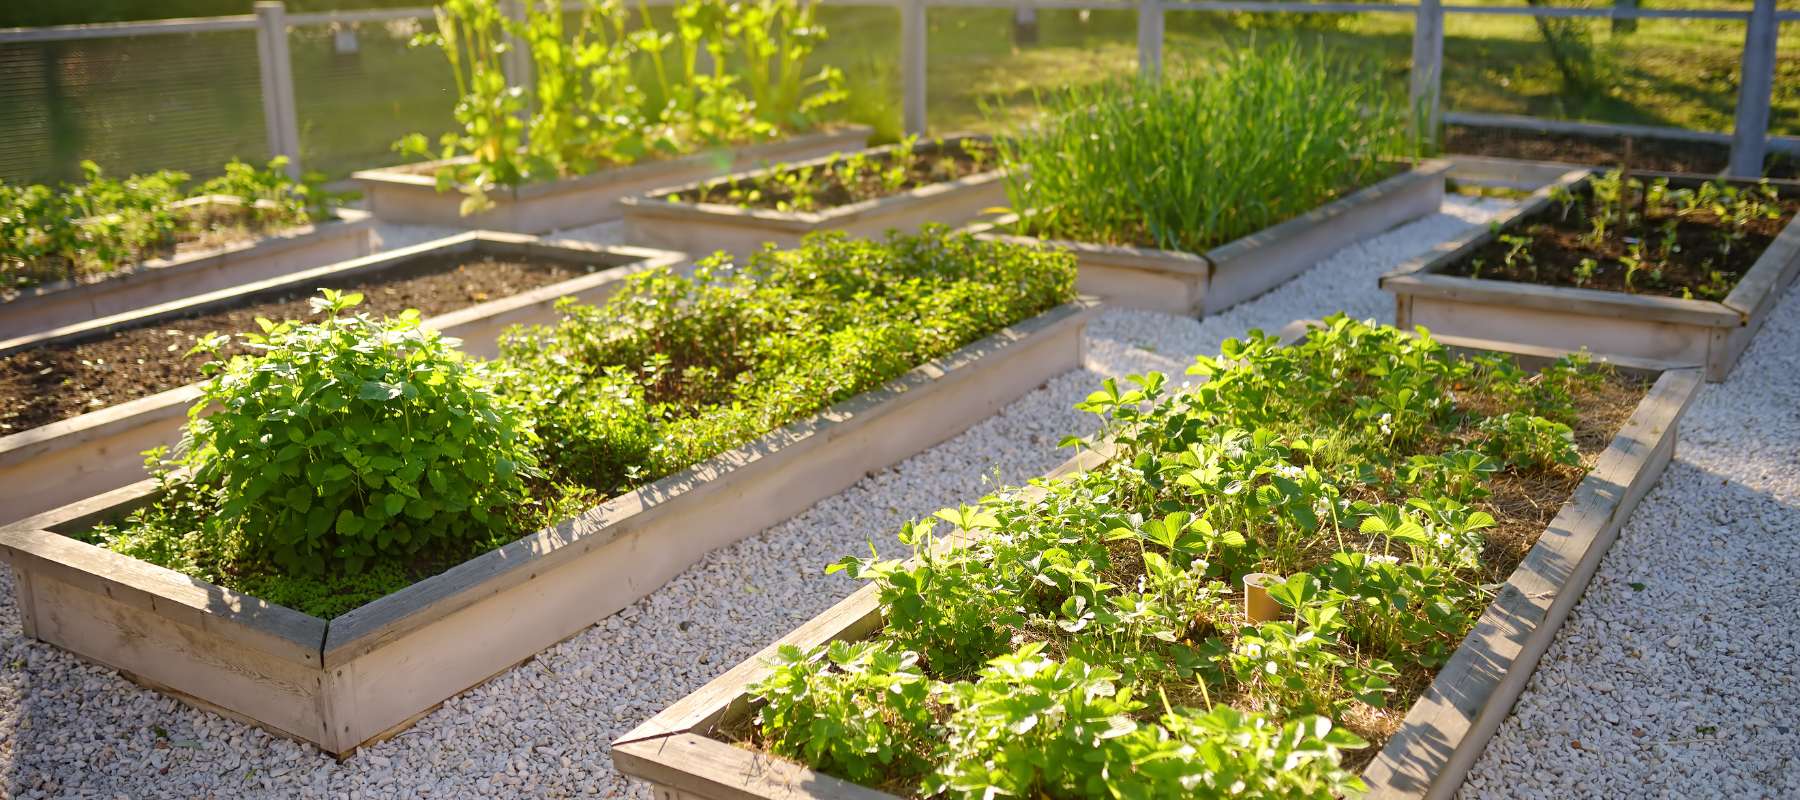 The Pros and Cons of Raised Bed Gardening